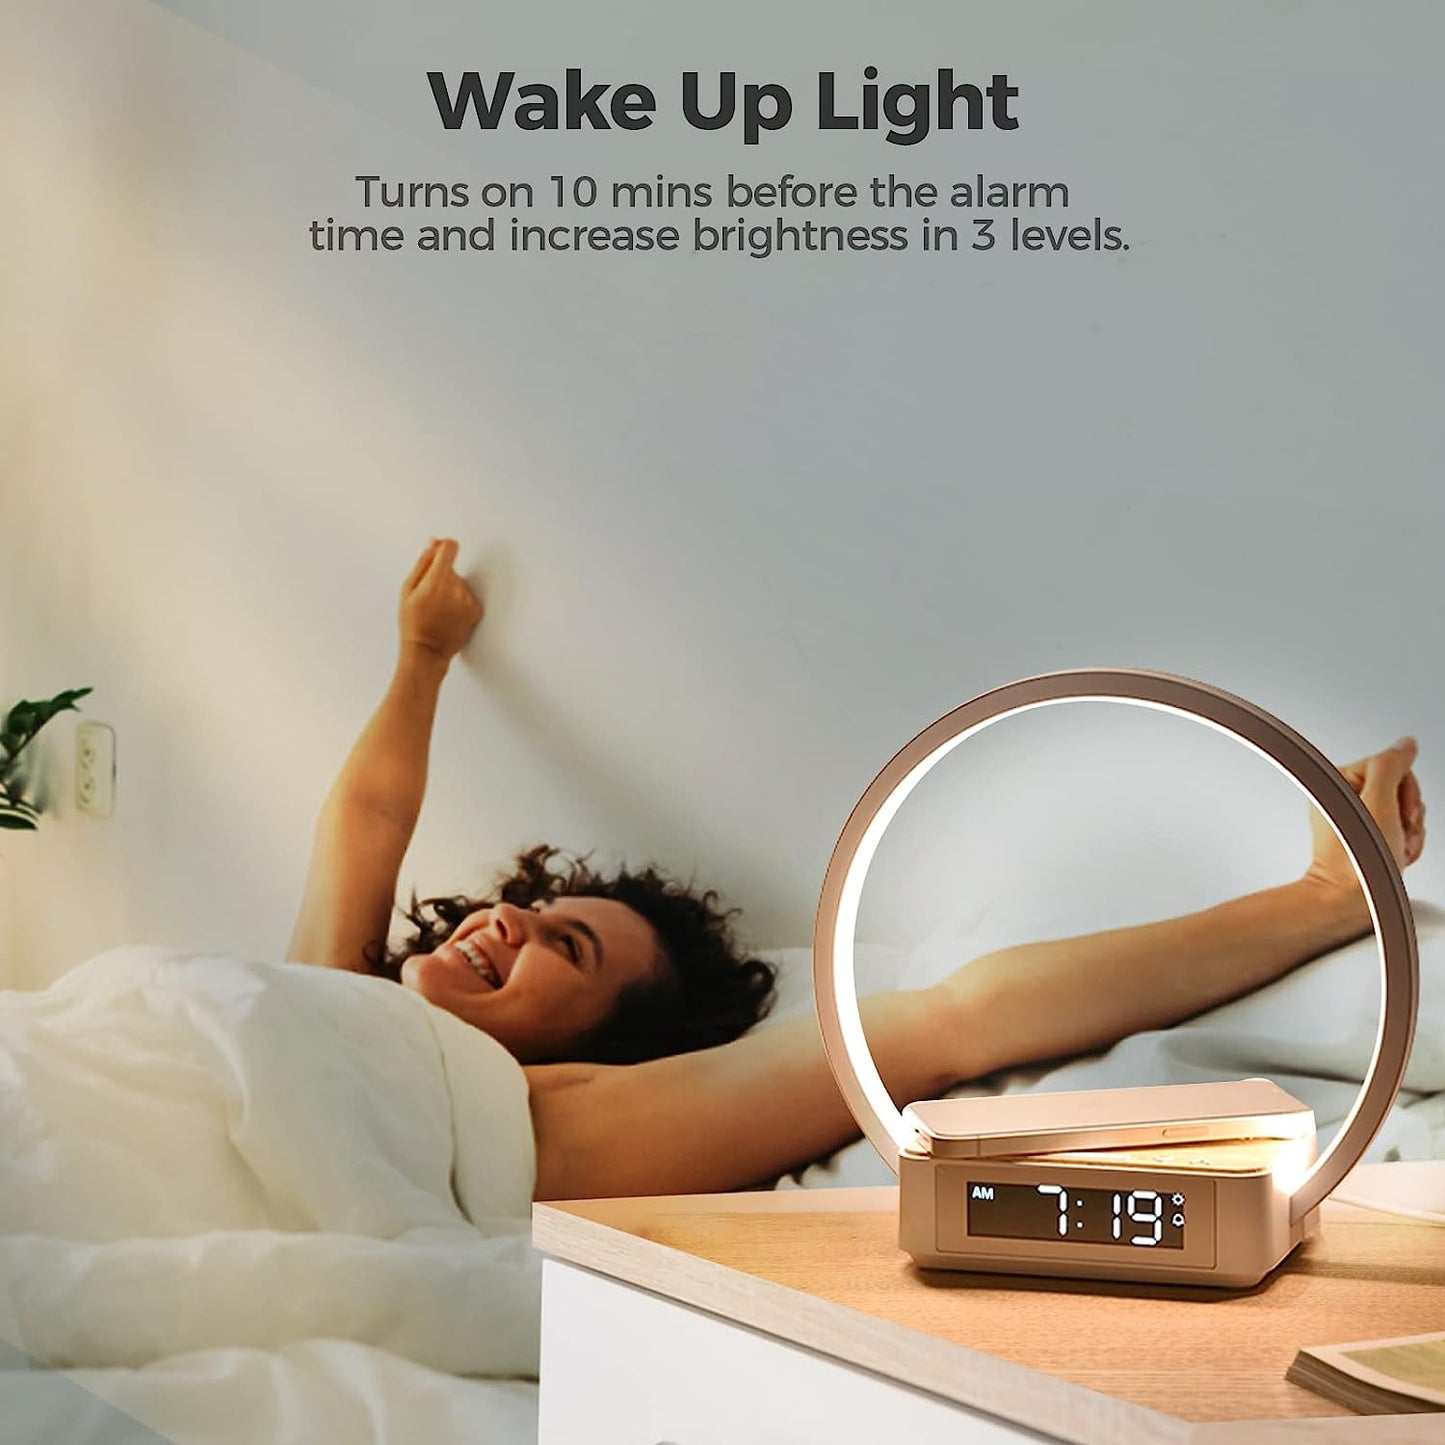 Bedside Lamp Qi Wireless Charger LED Desk Lamp with Alarm Clock, Touch Control 3 Light Hues, 10W Max Wireless Charging Table Lamp，Eye-Caring Reading Light for Kids, Adults, Home.